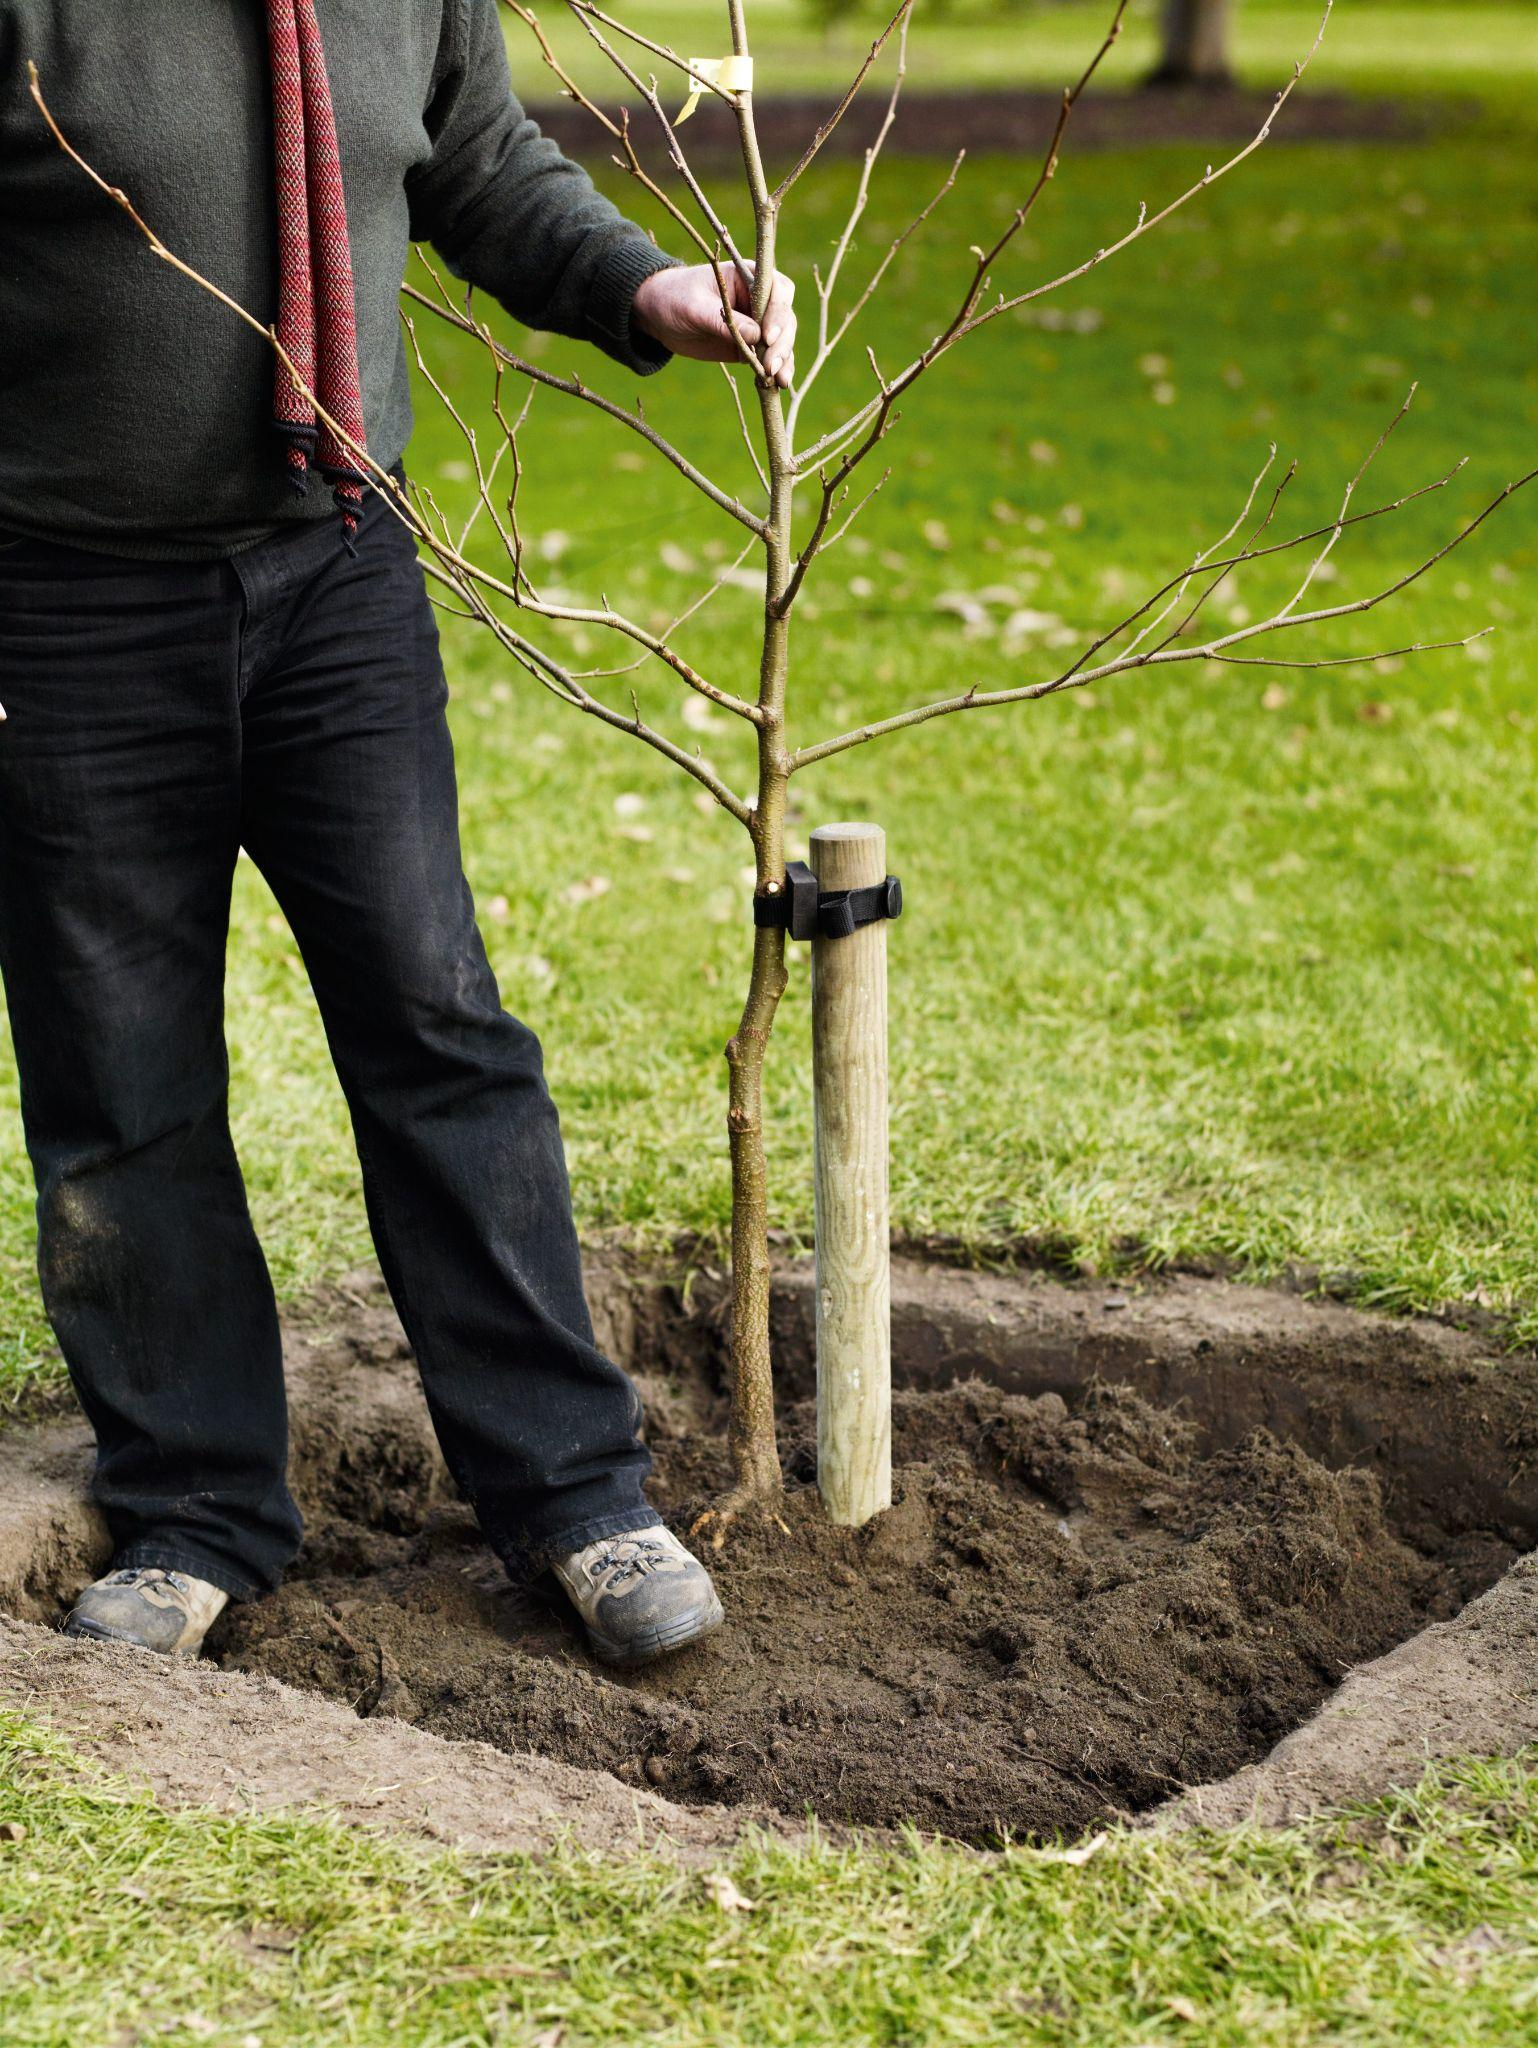 The Importance of Tree Planting: Why Every Community Should Consider It